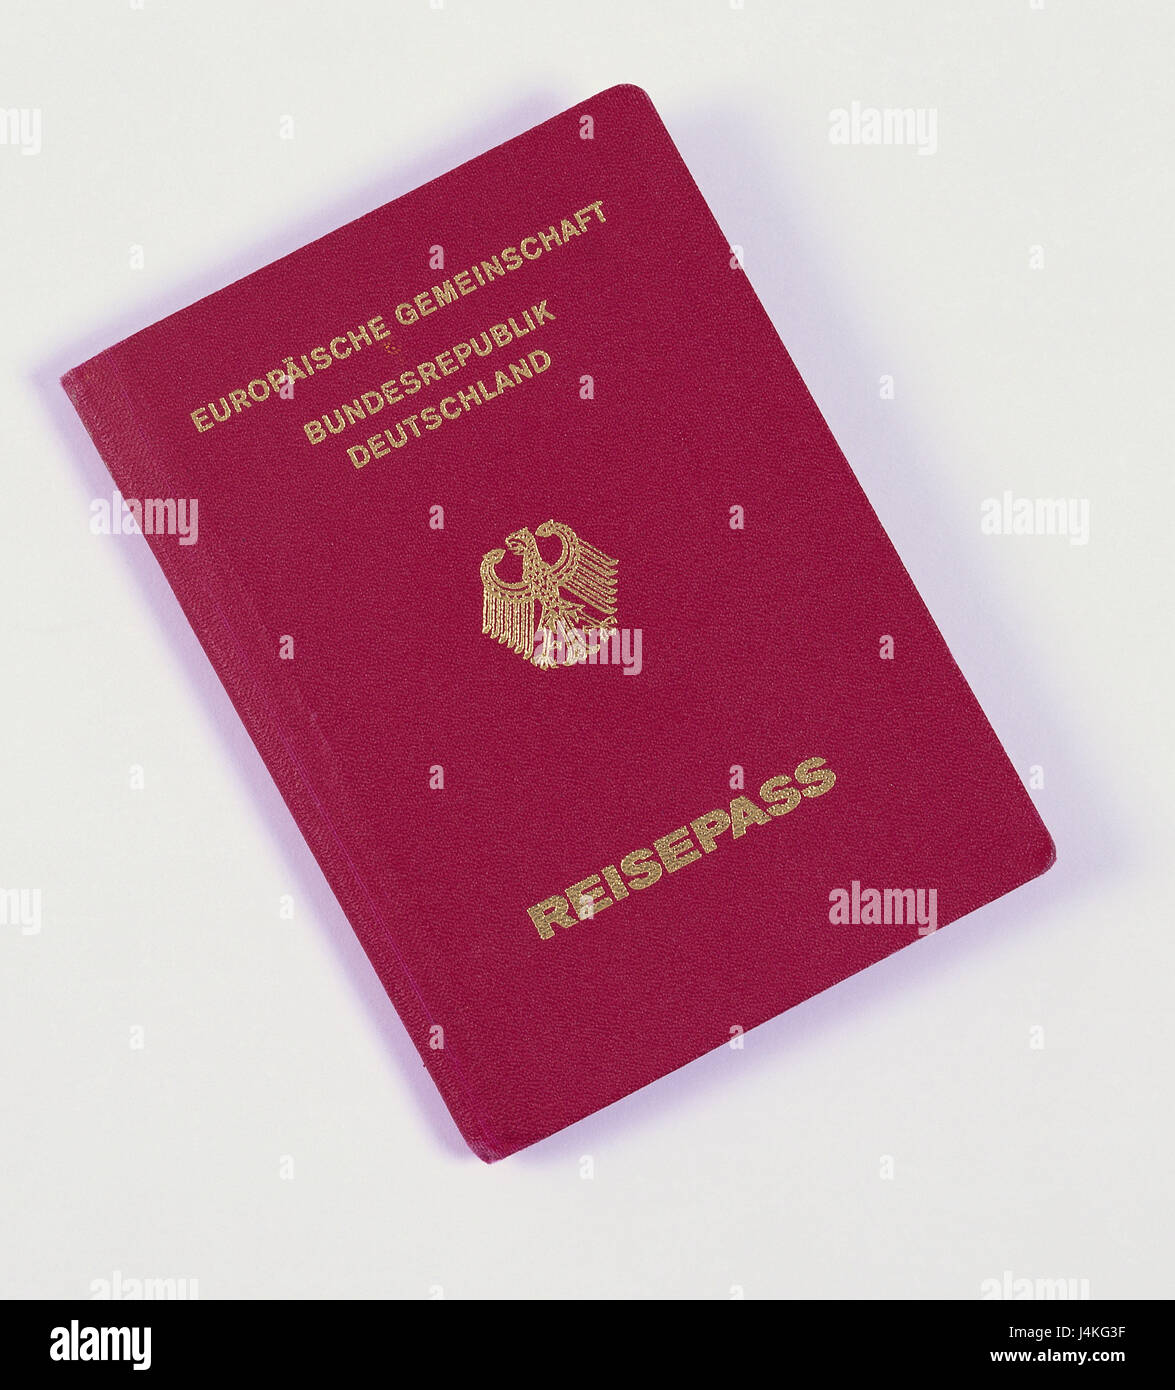 Passport, the Federal Republic of Germany, Europe, pass, identity card, identity card, identity, identity proof, European, European, in German, more in German, studio, object photography, still life Stock Photo